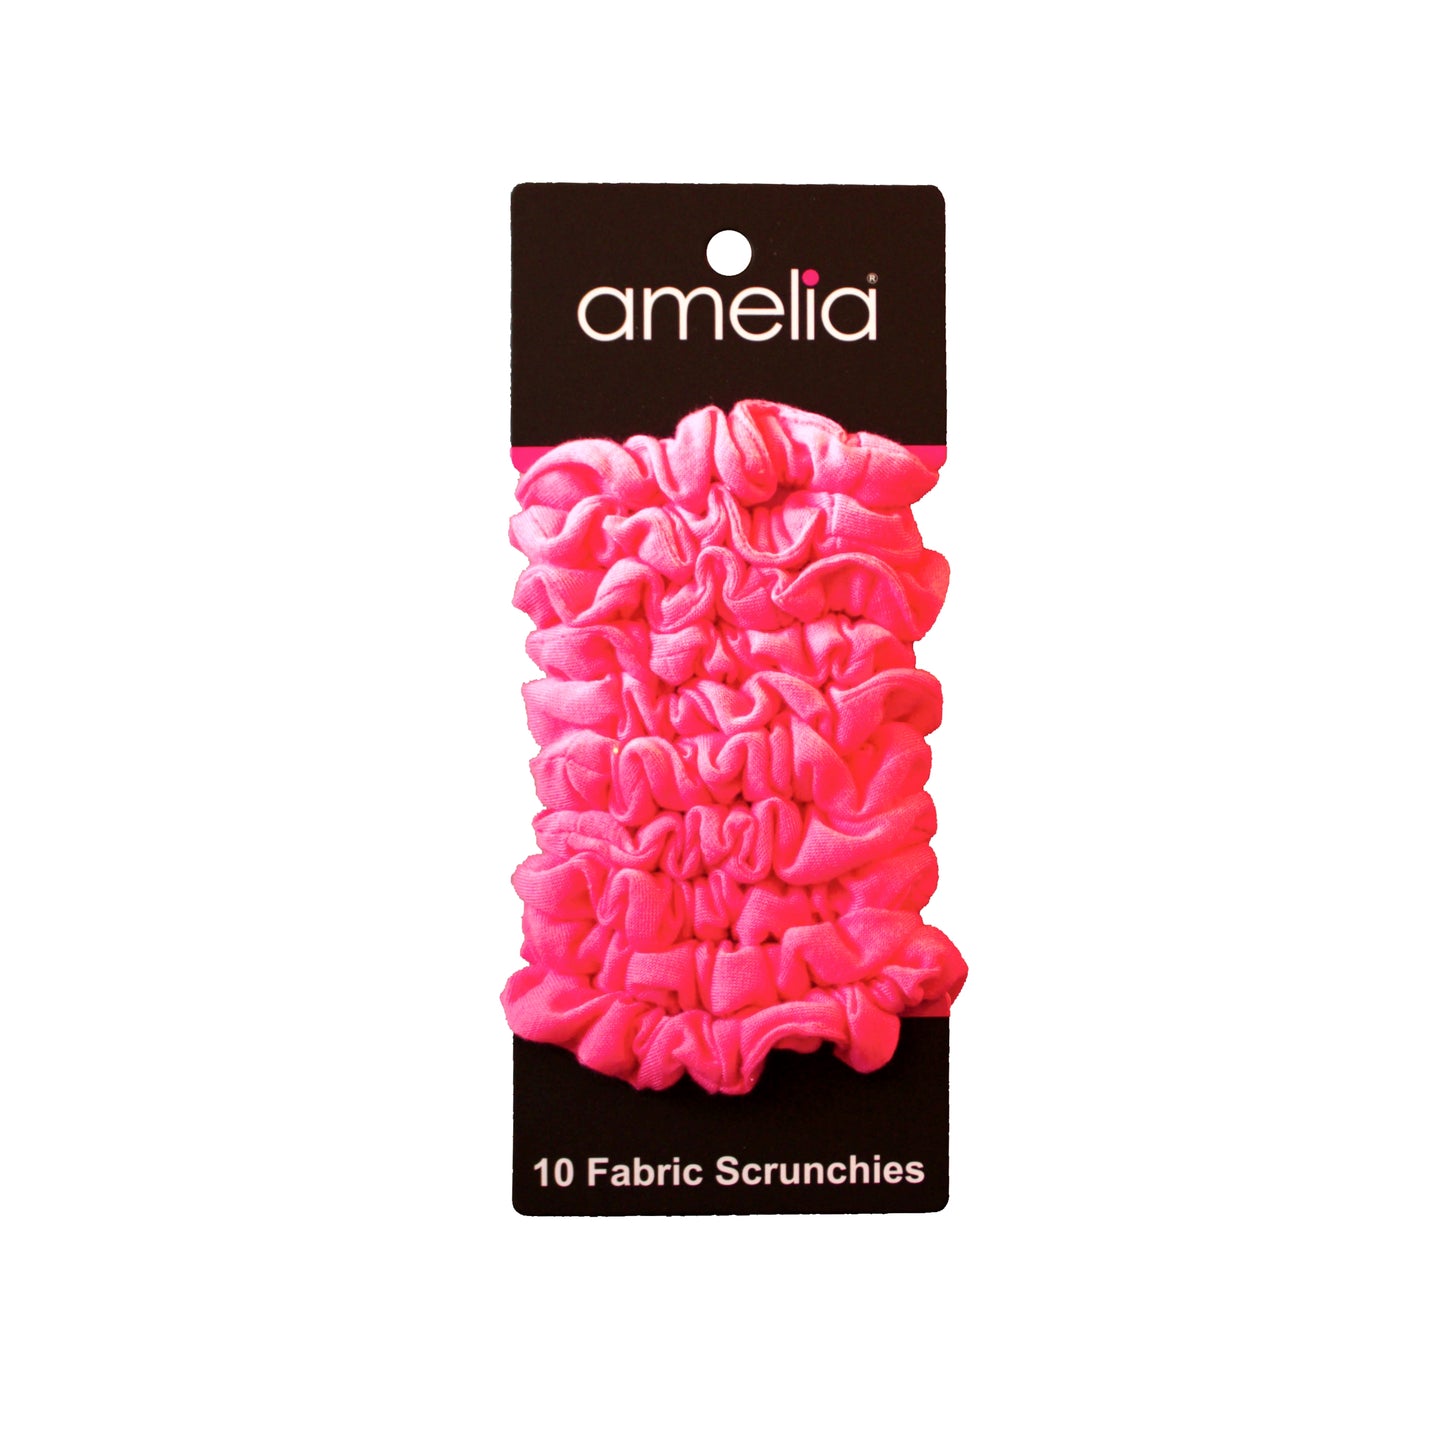 Amelia Beauty, Medium Neon Pink Jersey Scrunchies, 2.5in Diameter, Gentle on Hair, Strong Hold, No Snag, No Dents or Creases. 10 Pack